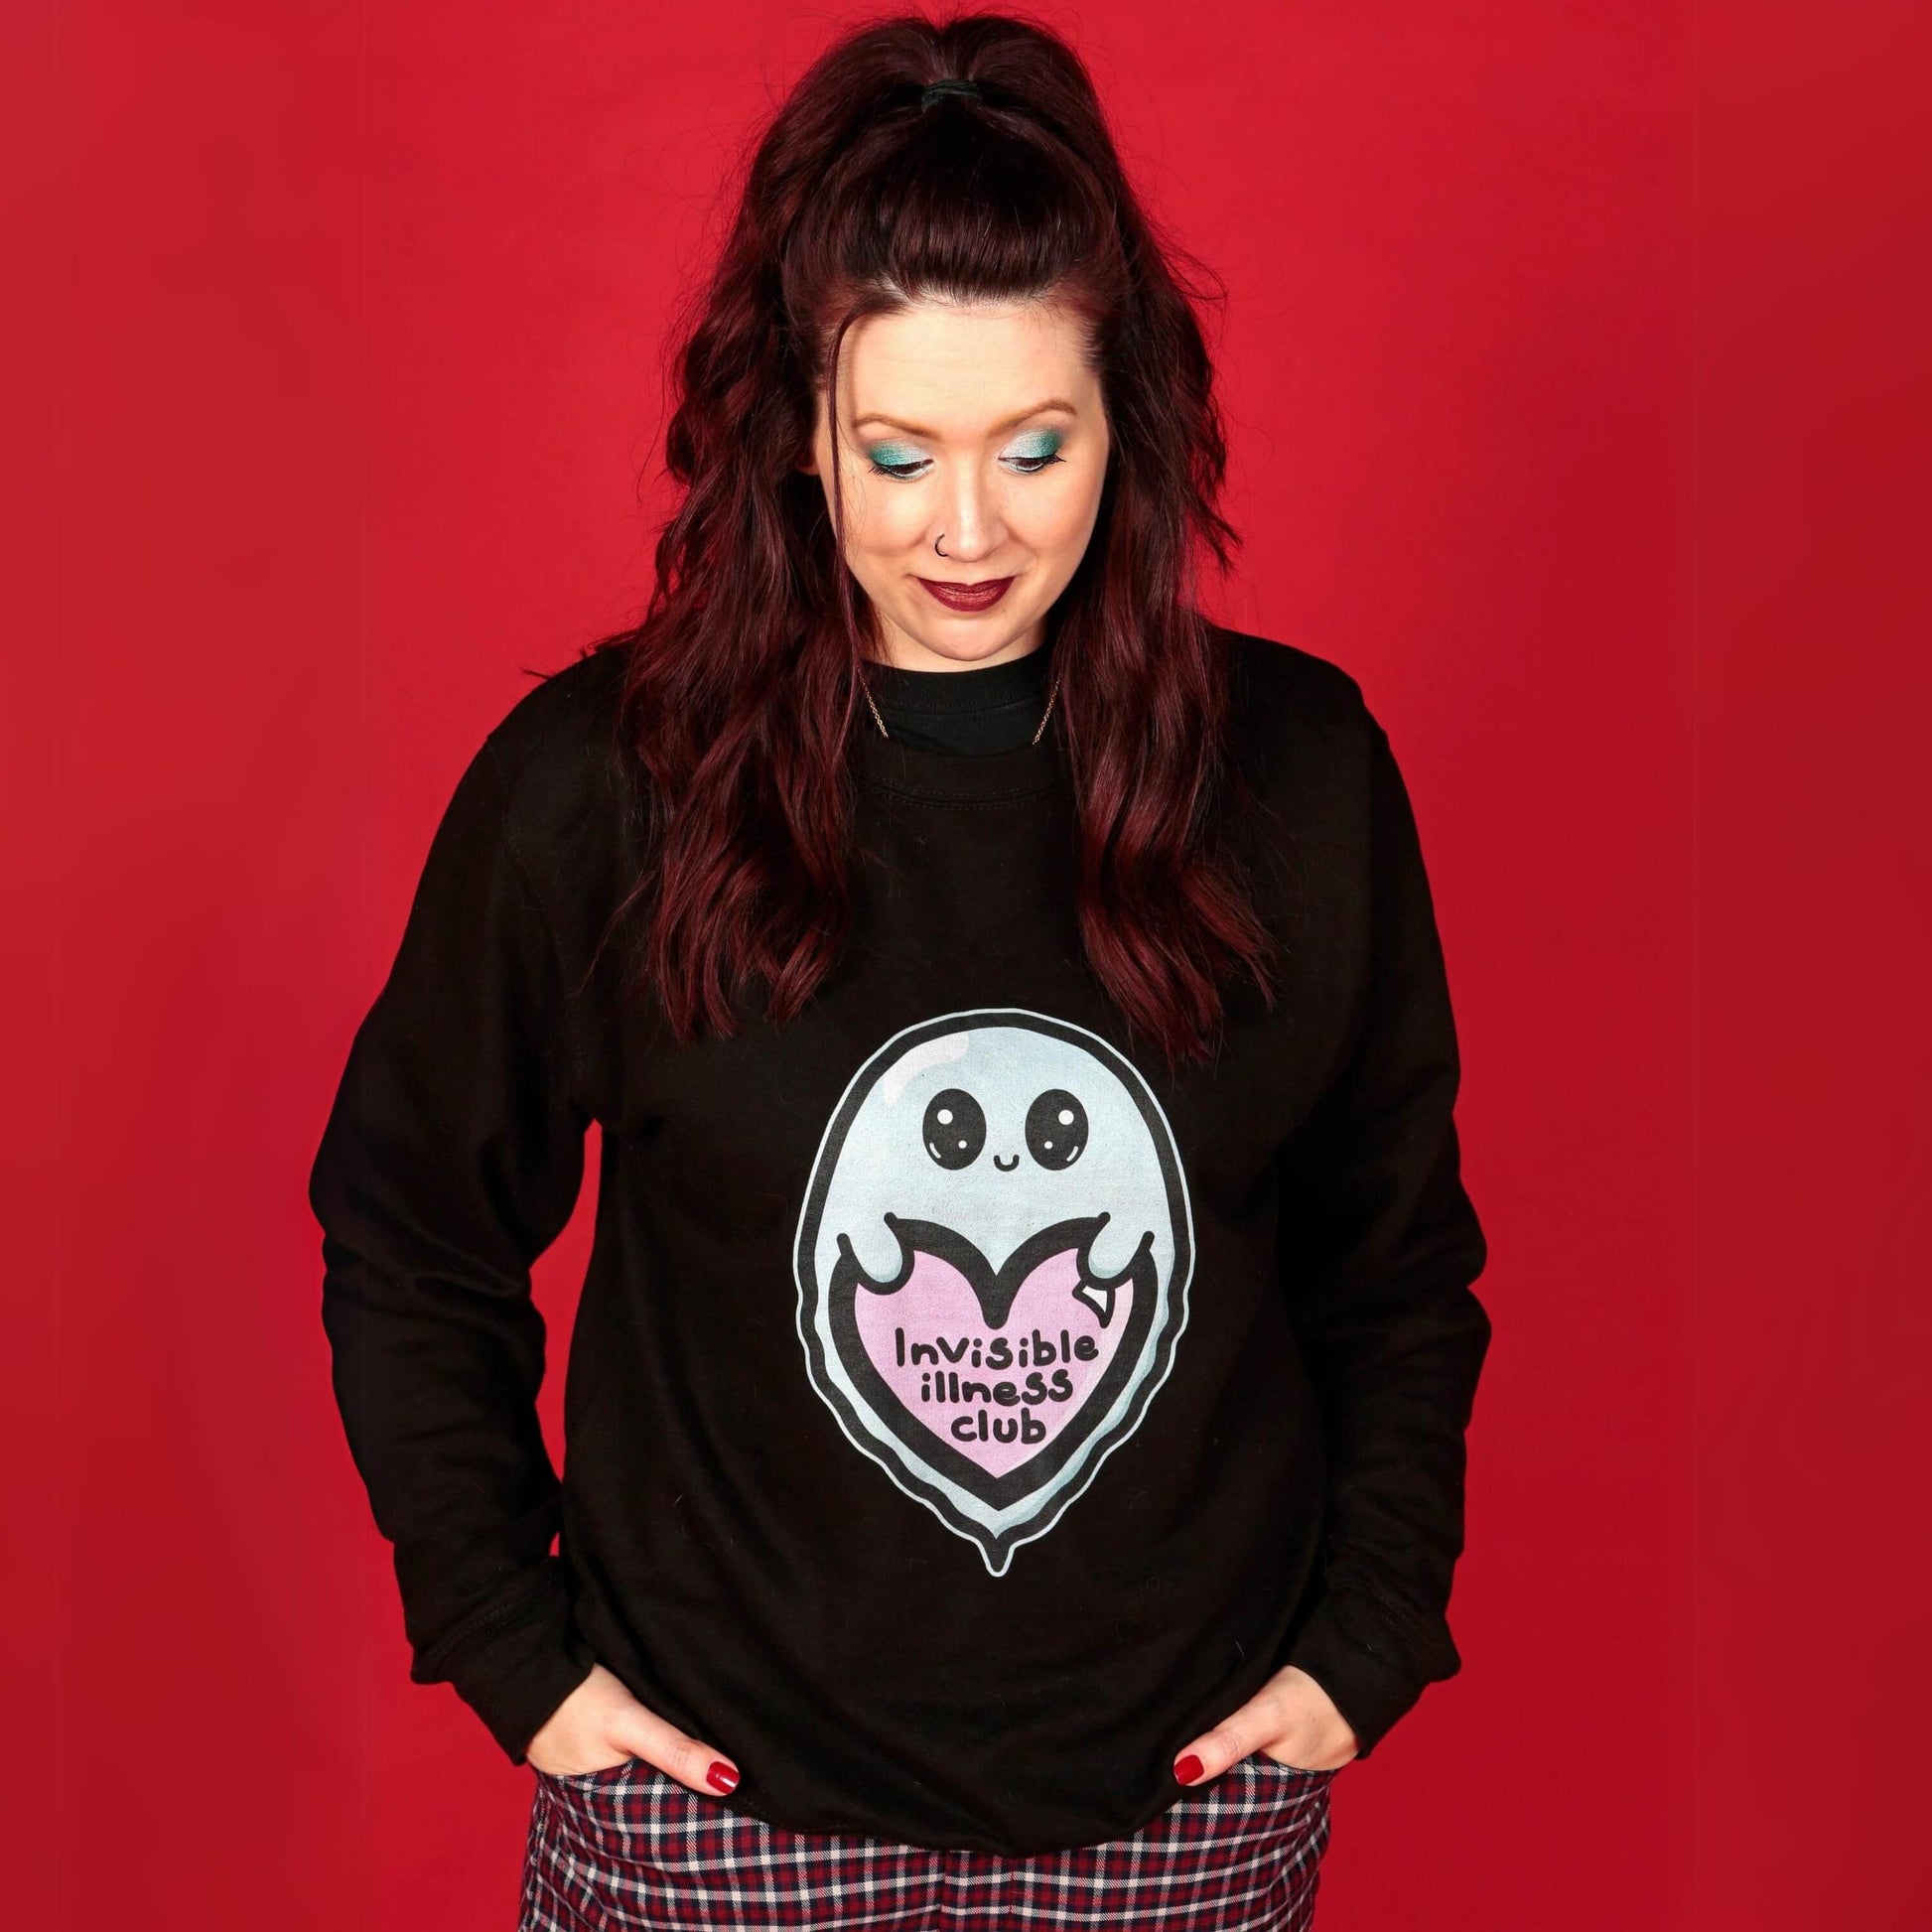 The Invisible Illness Club Sweatshirt Jumper being modelled by Nikky (owner of innabox) who has brown hair, blue eye makeup and blue and red nails. She is facing forward smiling looking down with both hands tucked in her red check trouser pockets. The black sweater features a smiling pastel blue ghost with big sparkly eyes holding up a pastel pink heart with black text reading 'invisible illness club'. The hand drawn design is raising awareness for hidden disabilities.